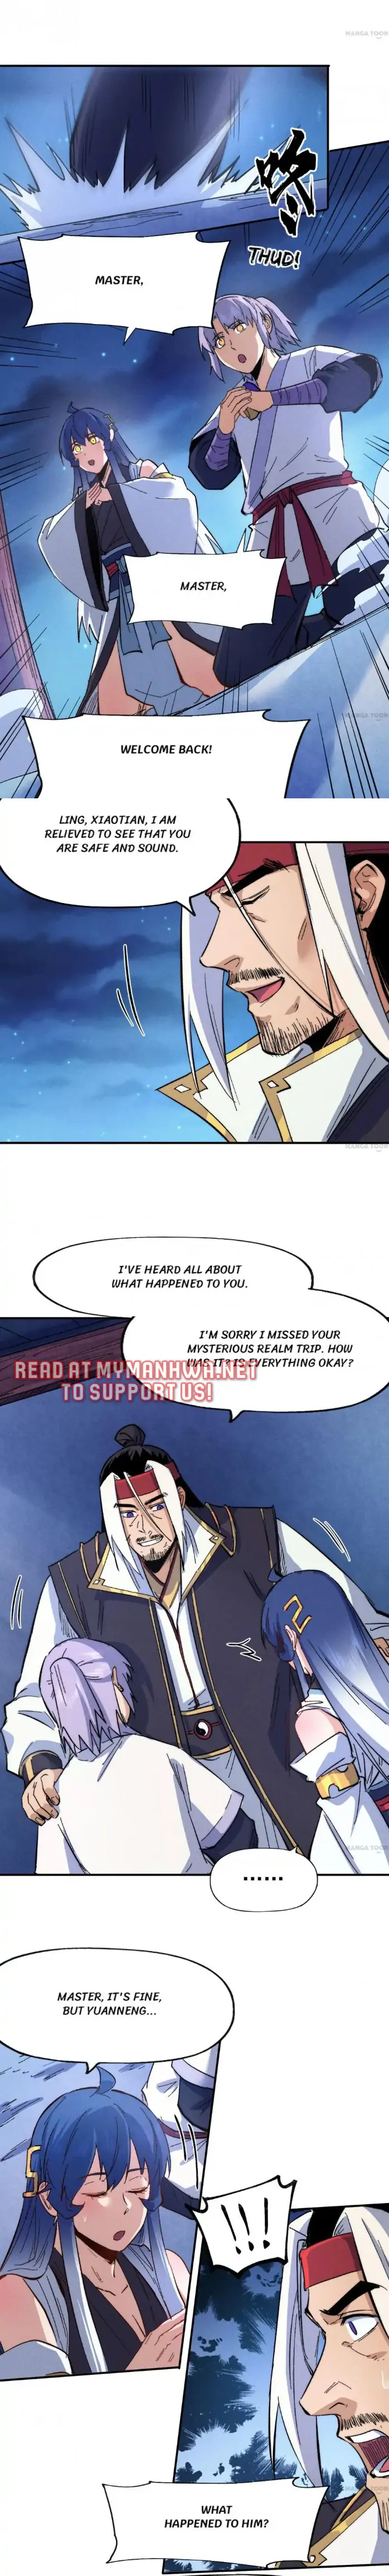 The Strongest Hero Ever - Page 2